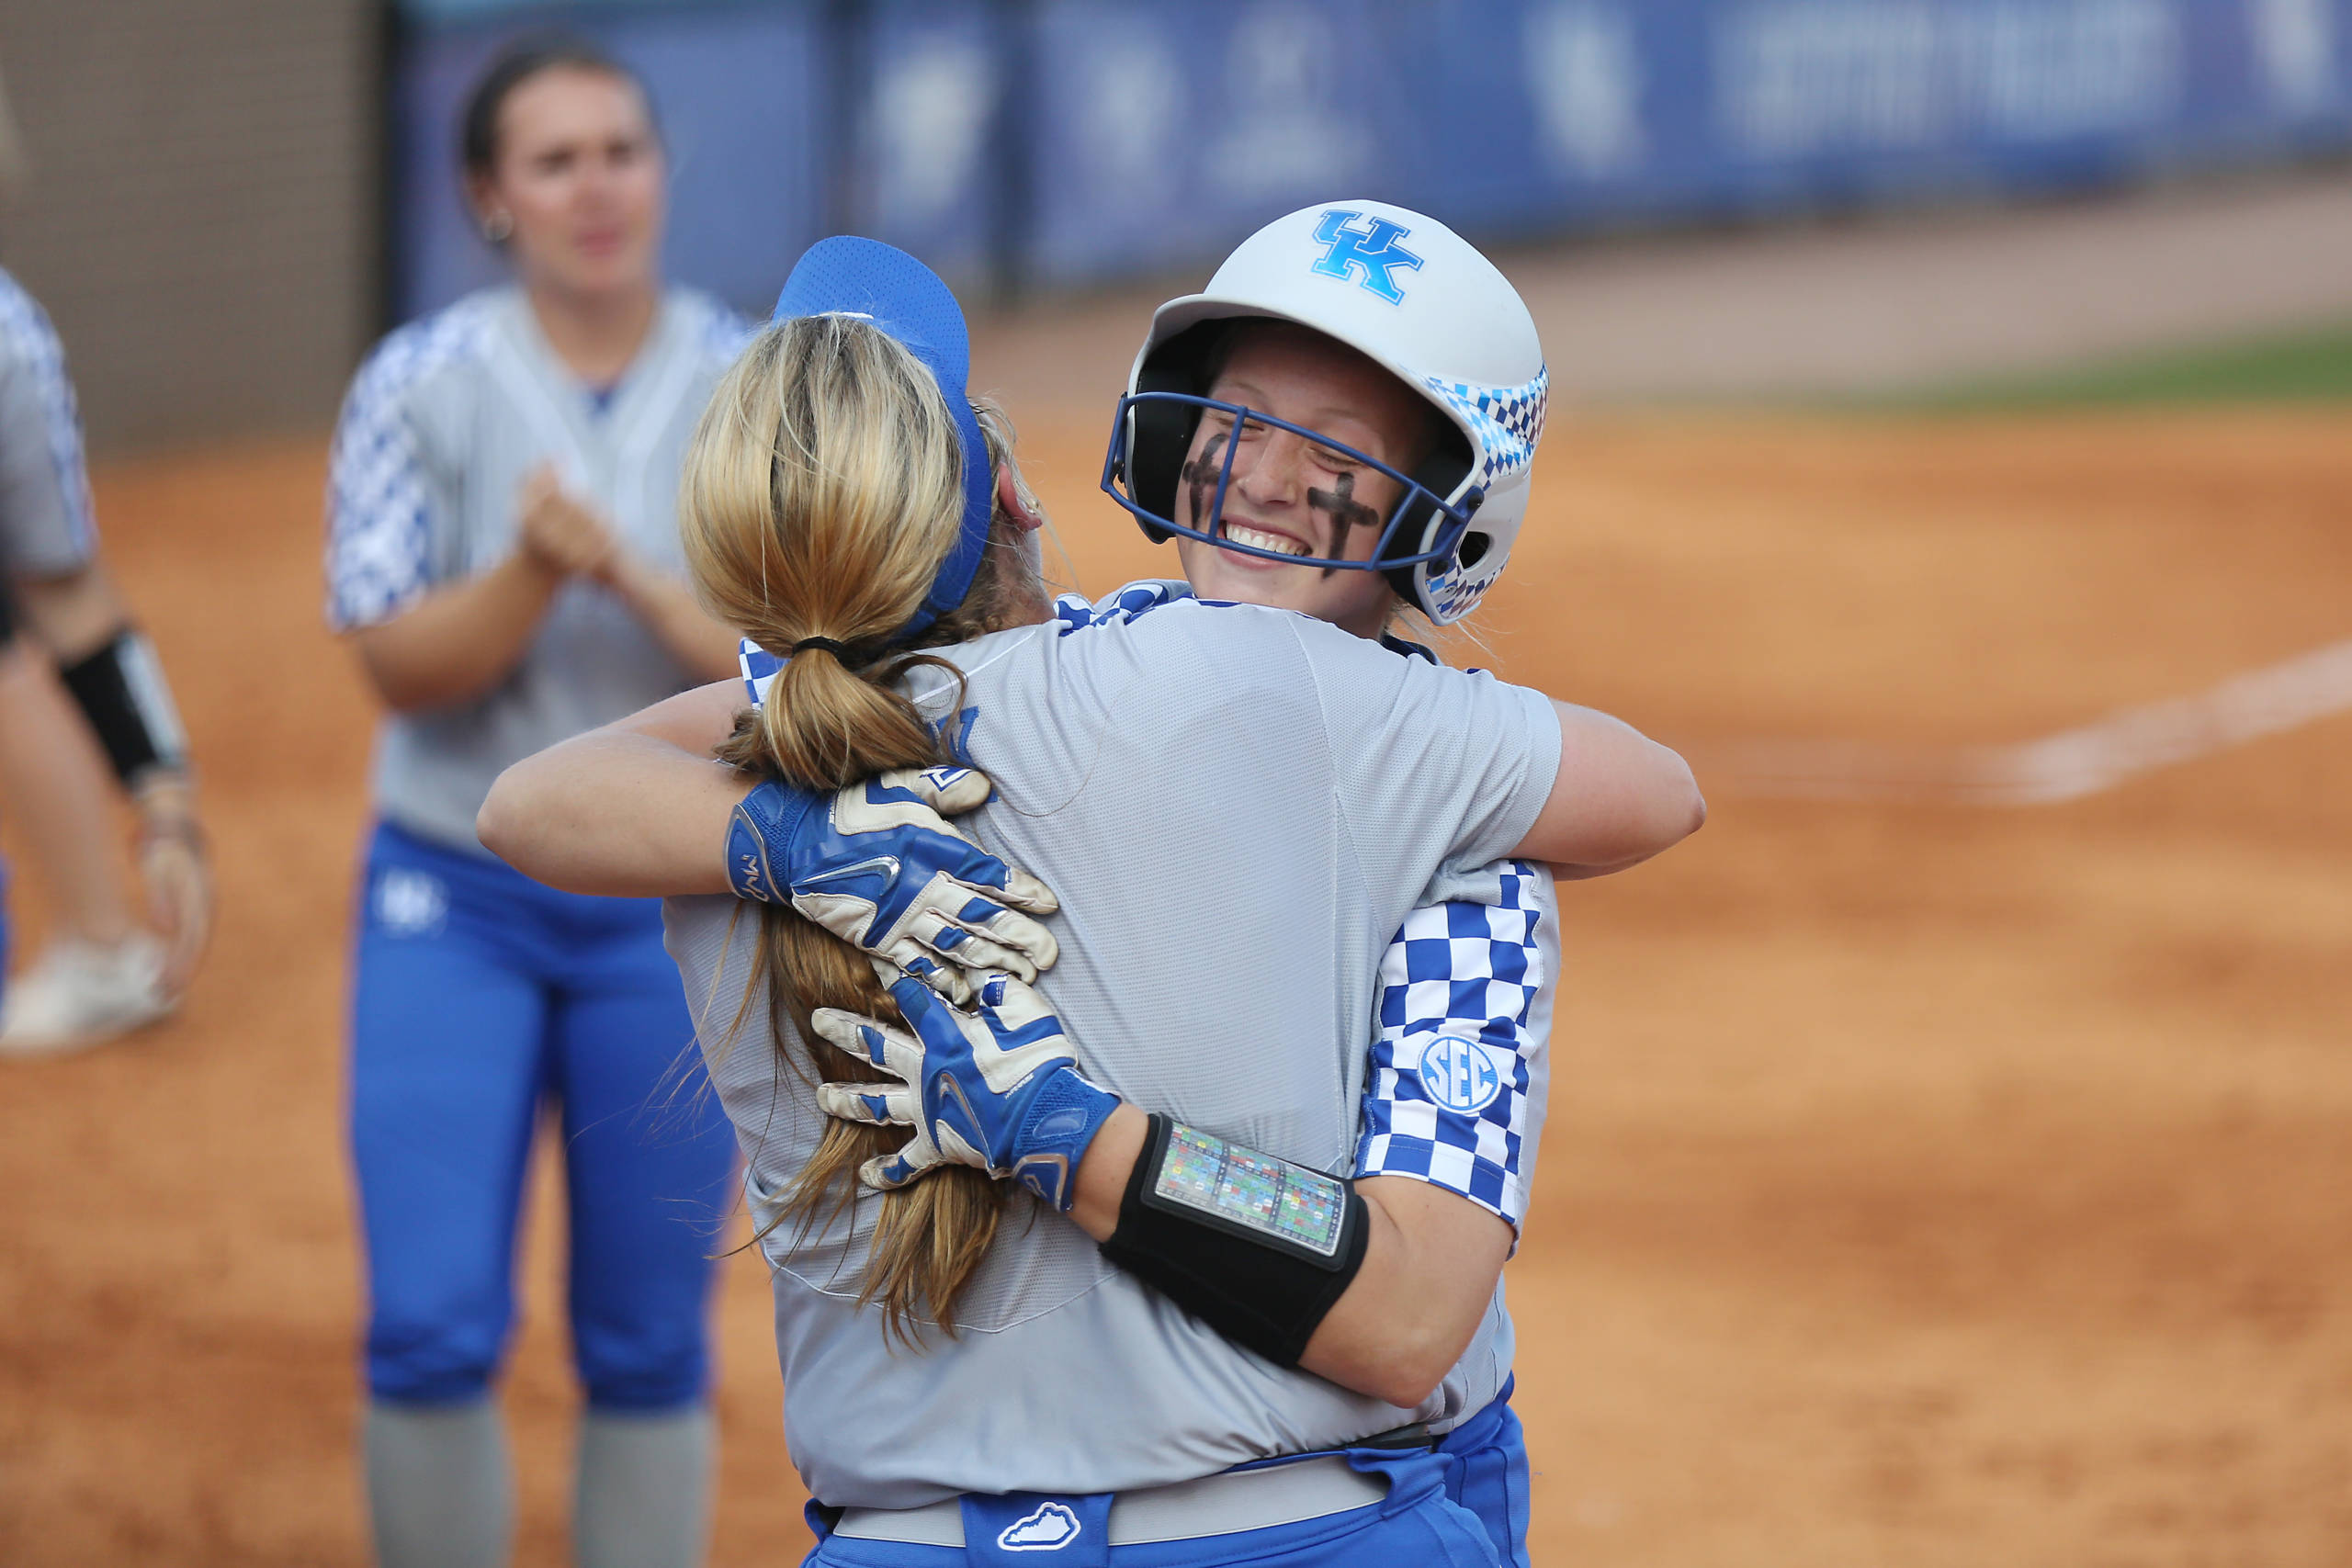 Schaper’s 11th-Inning Home Run Gives UK Win Over No. 5 UCLA